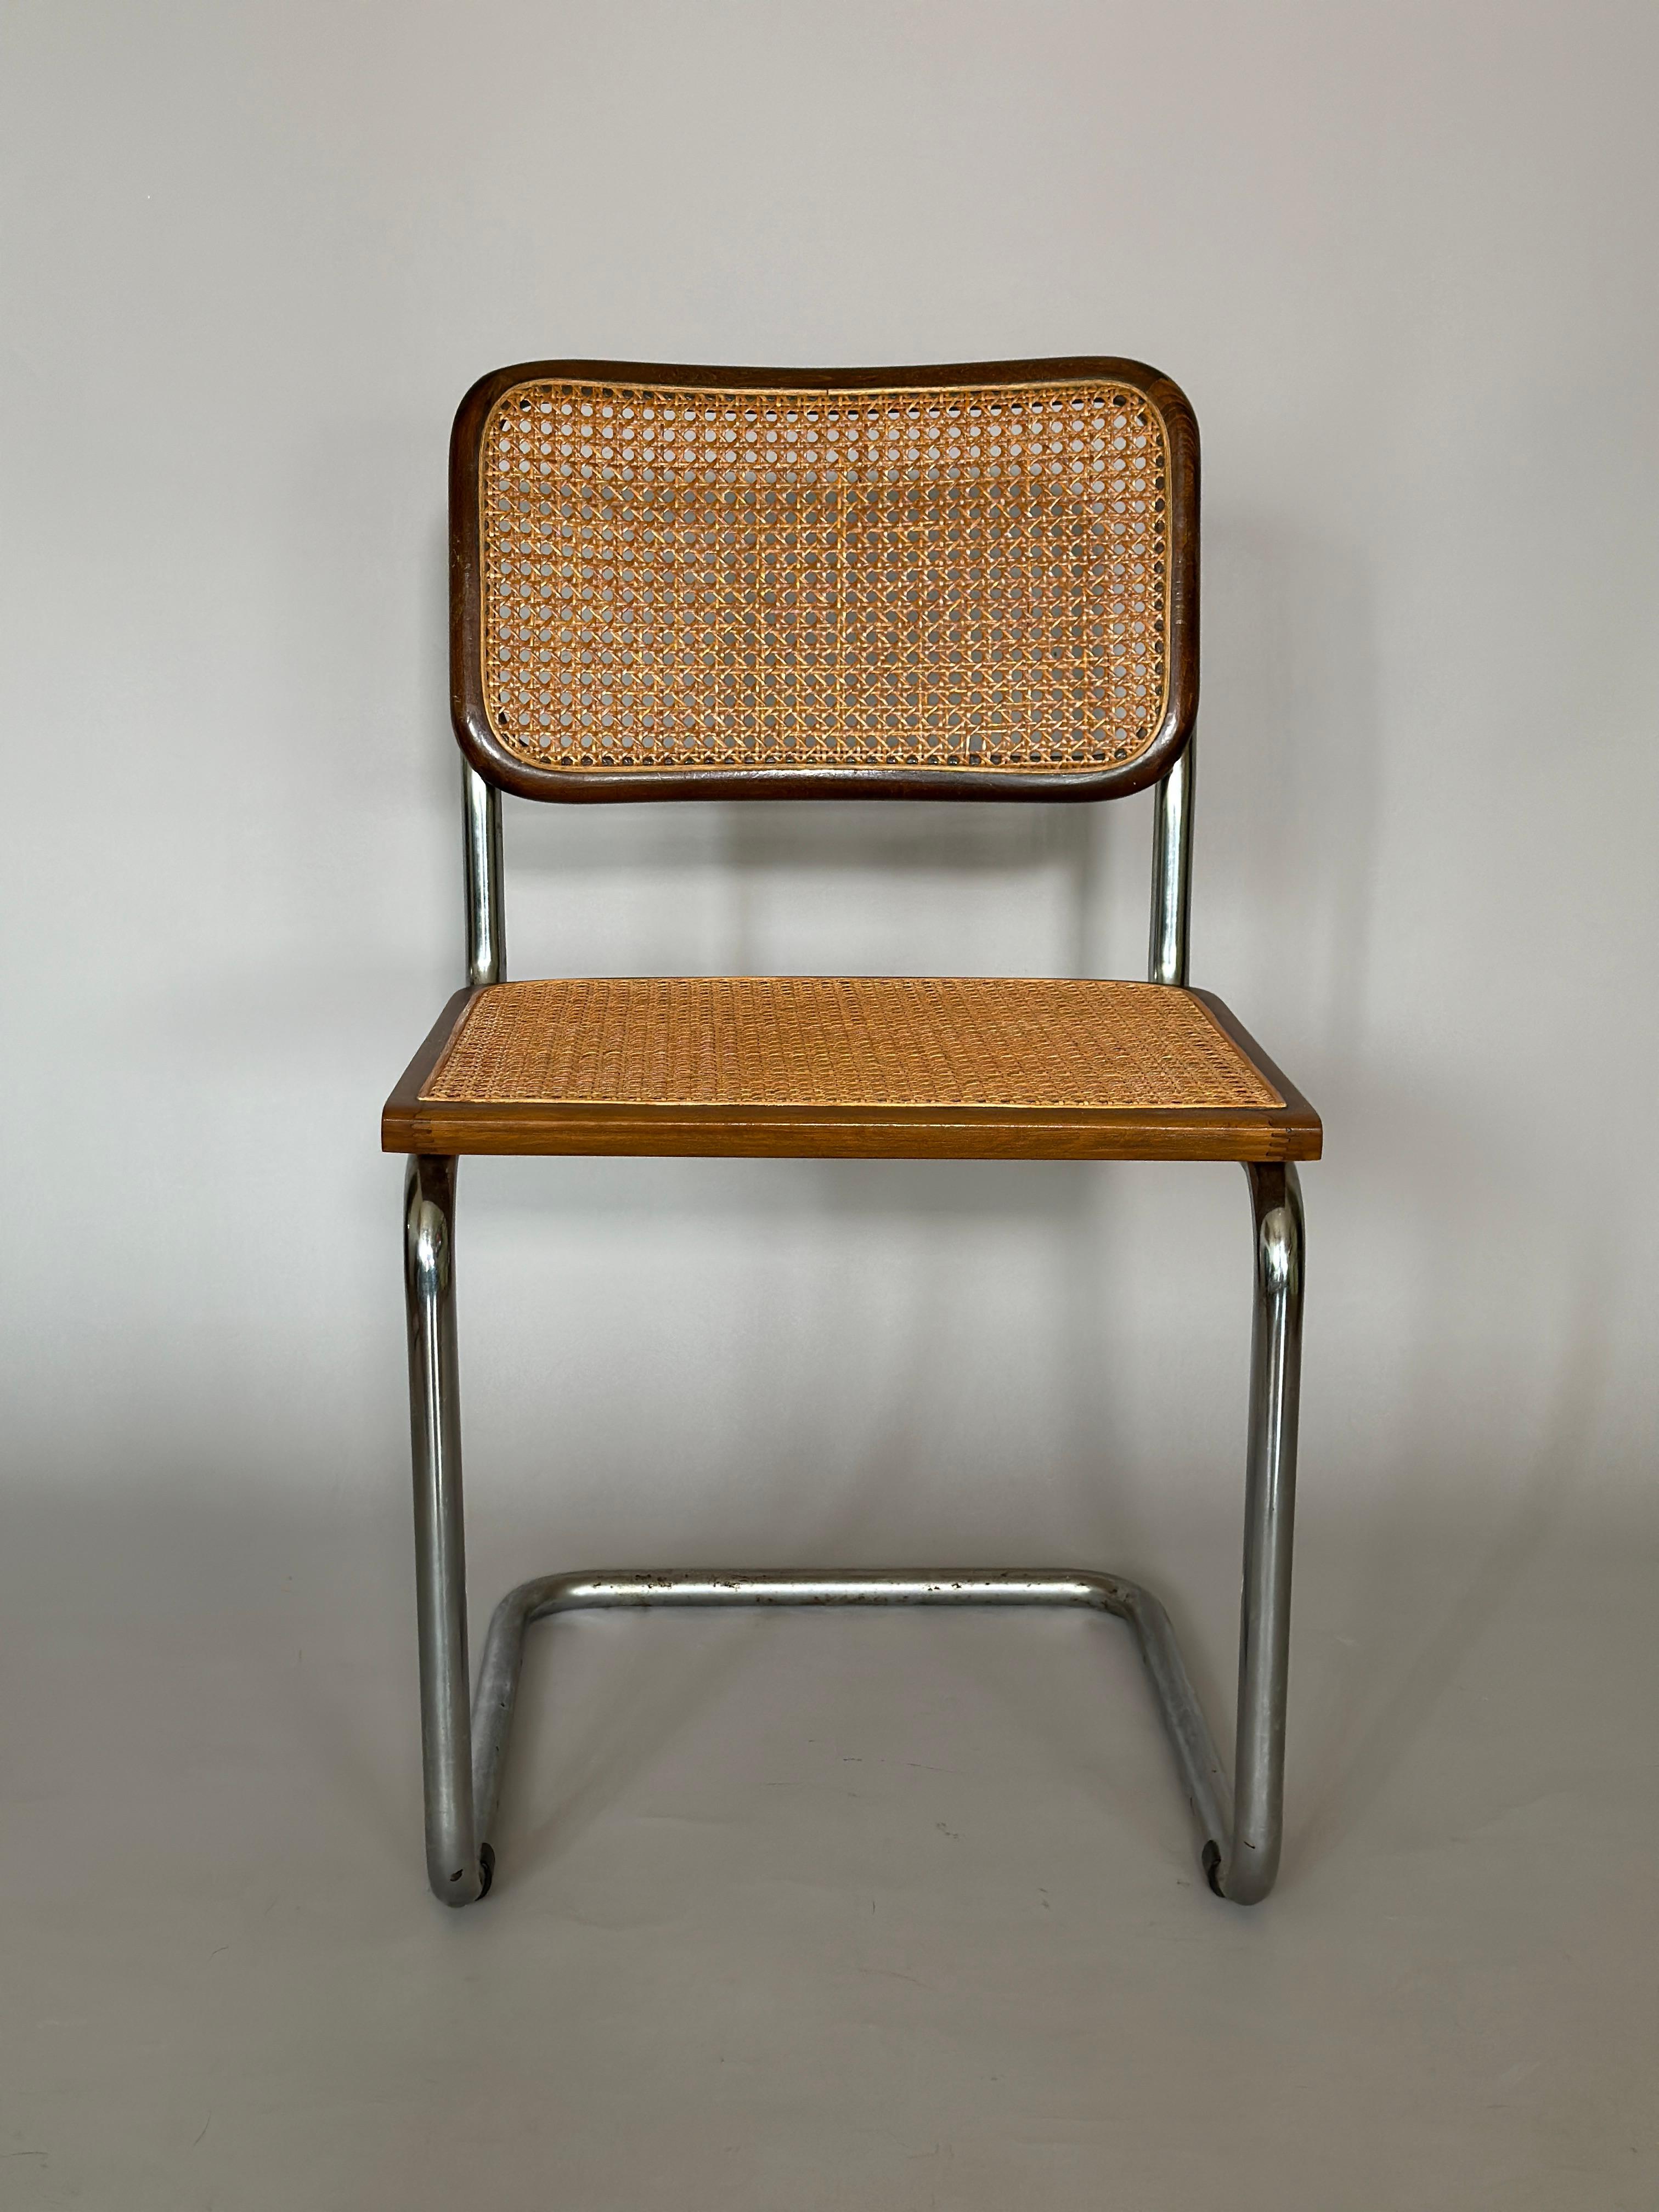 Cesca chair based on Marcel Breuer 1928 design, This chair are italian version made 1980s.